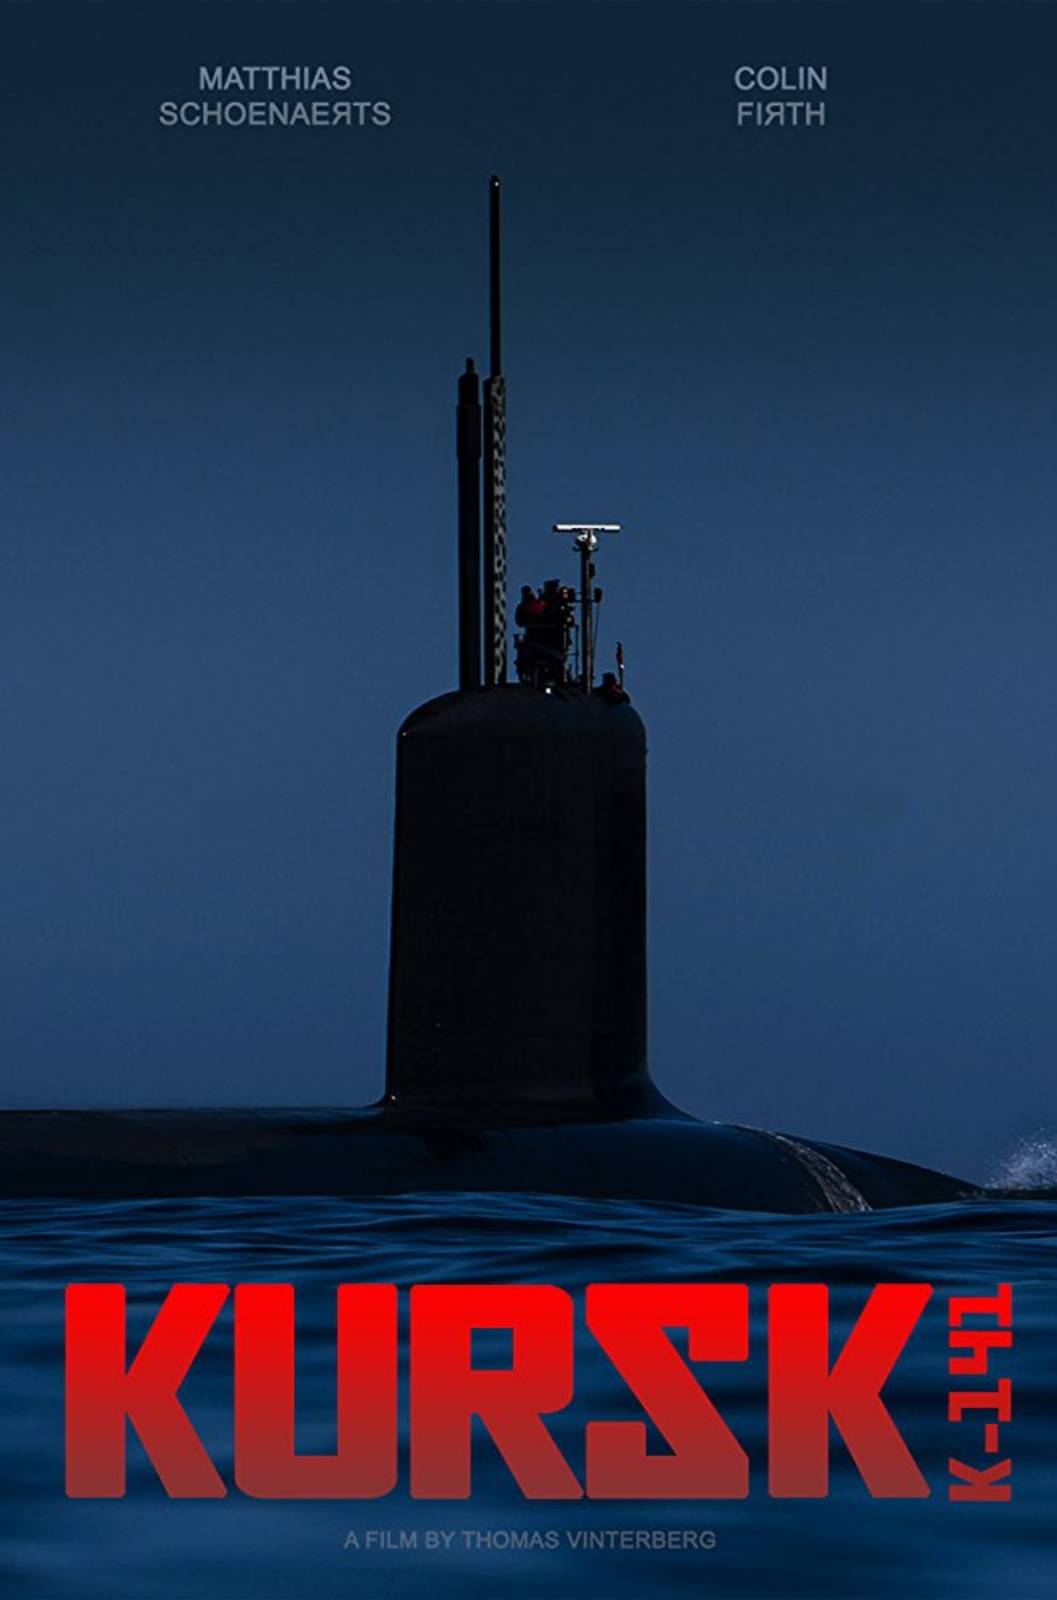 Kursk (Streaming, Synopsis, Casting, Bande annonce)